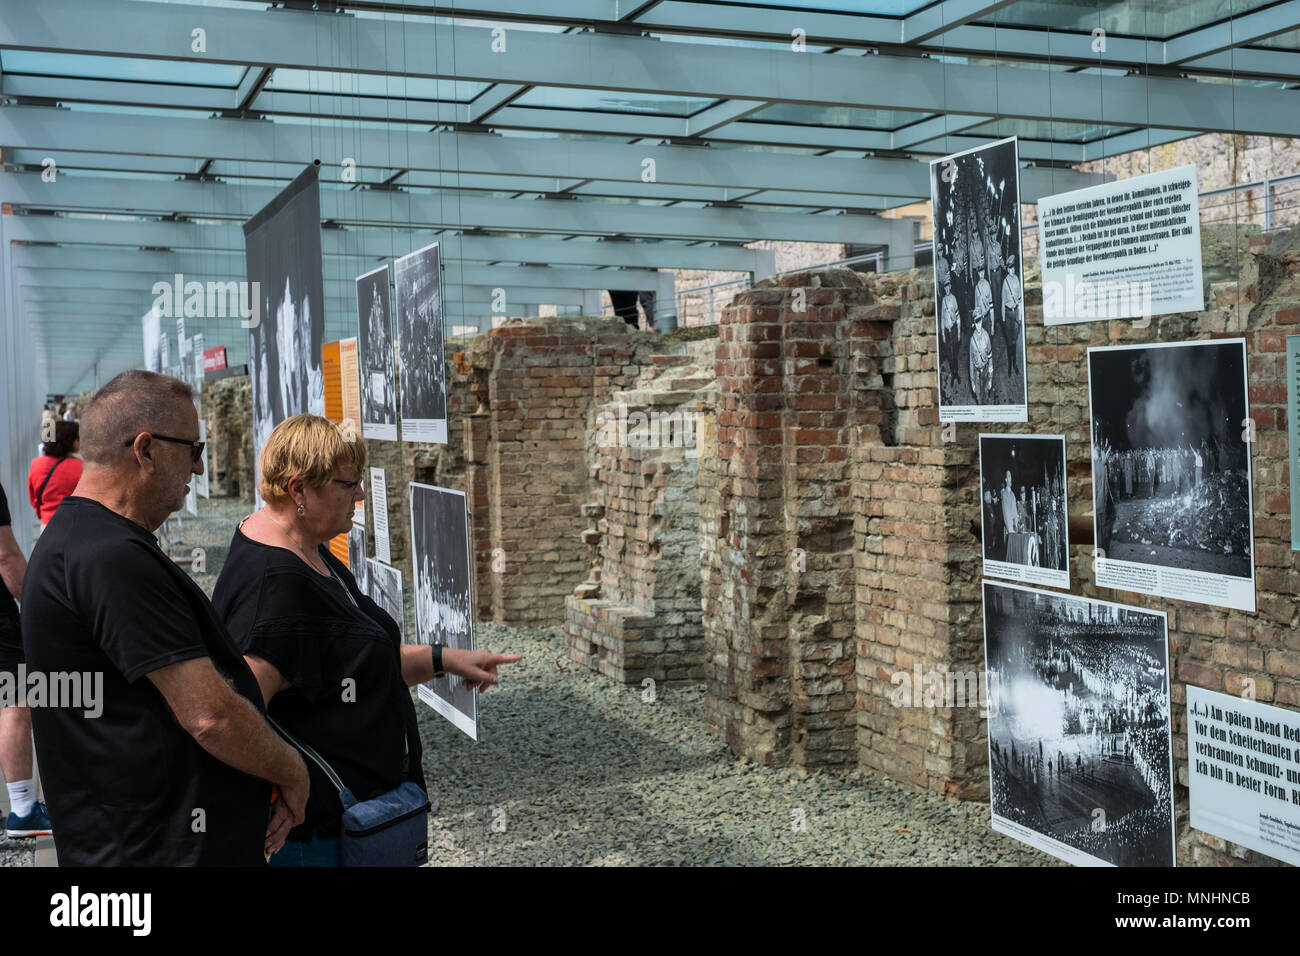 Berlin, Germany - may, 2018: People at the Topography of Terror (German: Topographie des Terrors) outdoor   history museum in Berlin, Germany Stock Photo